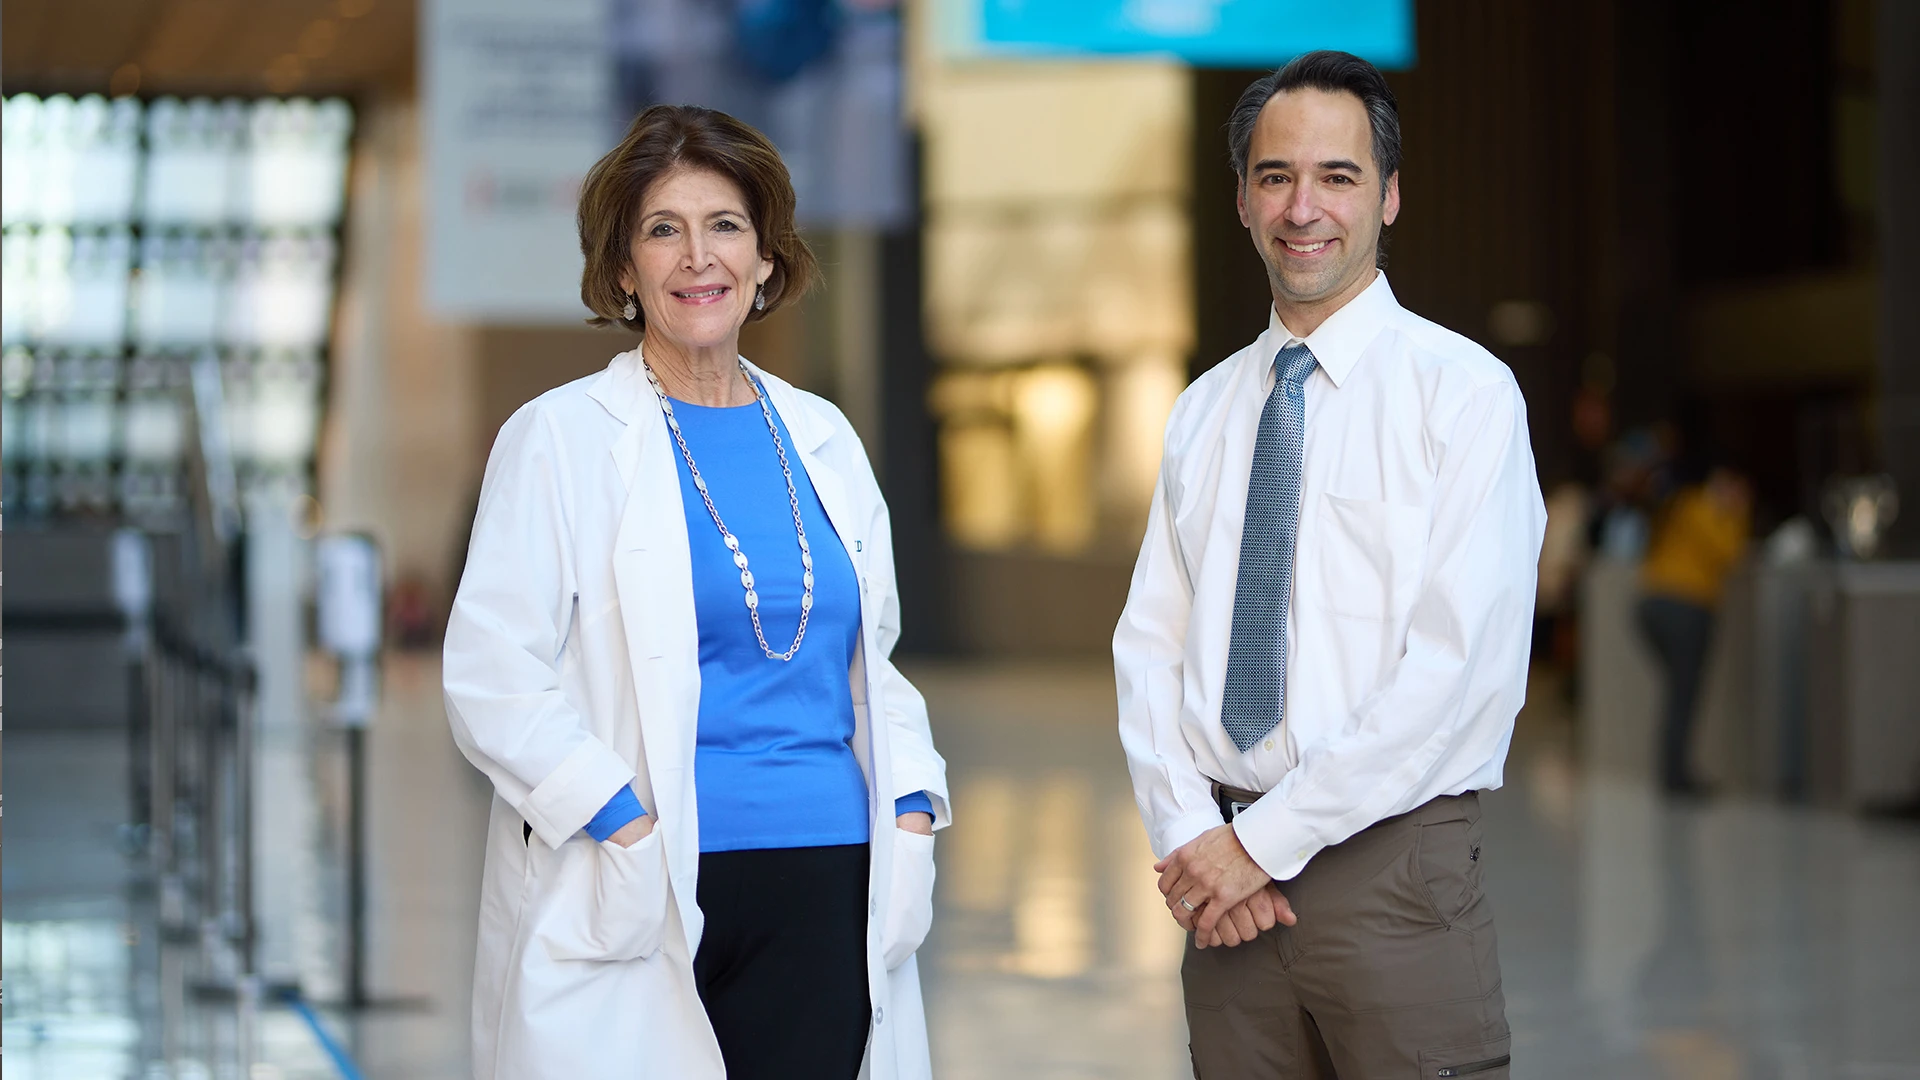 Alice Levine, MD, and Michael Via, MD, are co-directors of the Endocrinology Fellowship Program.